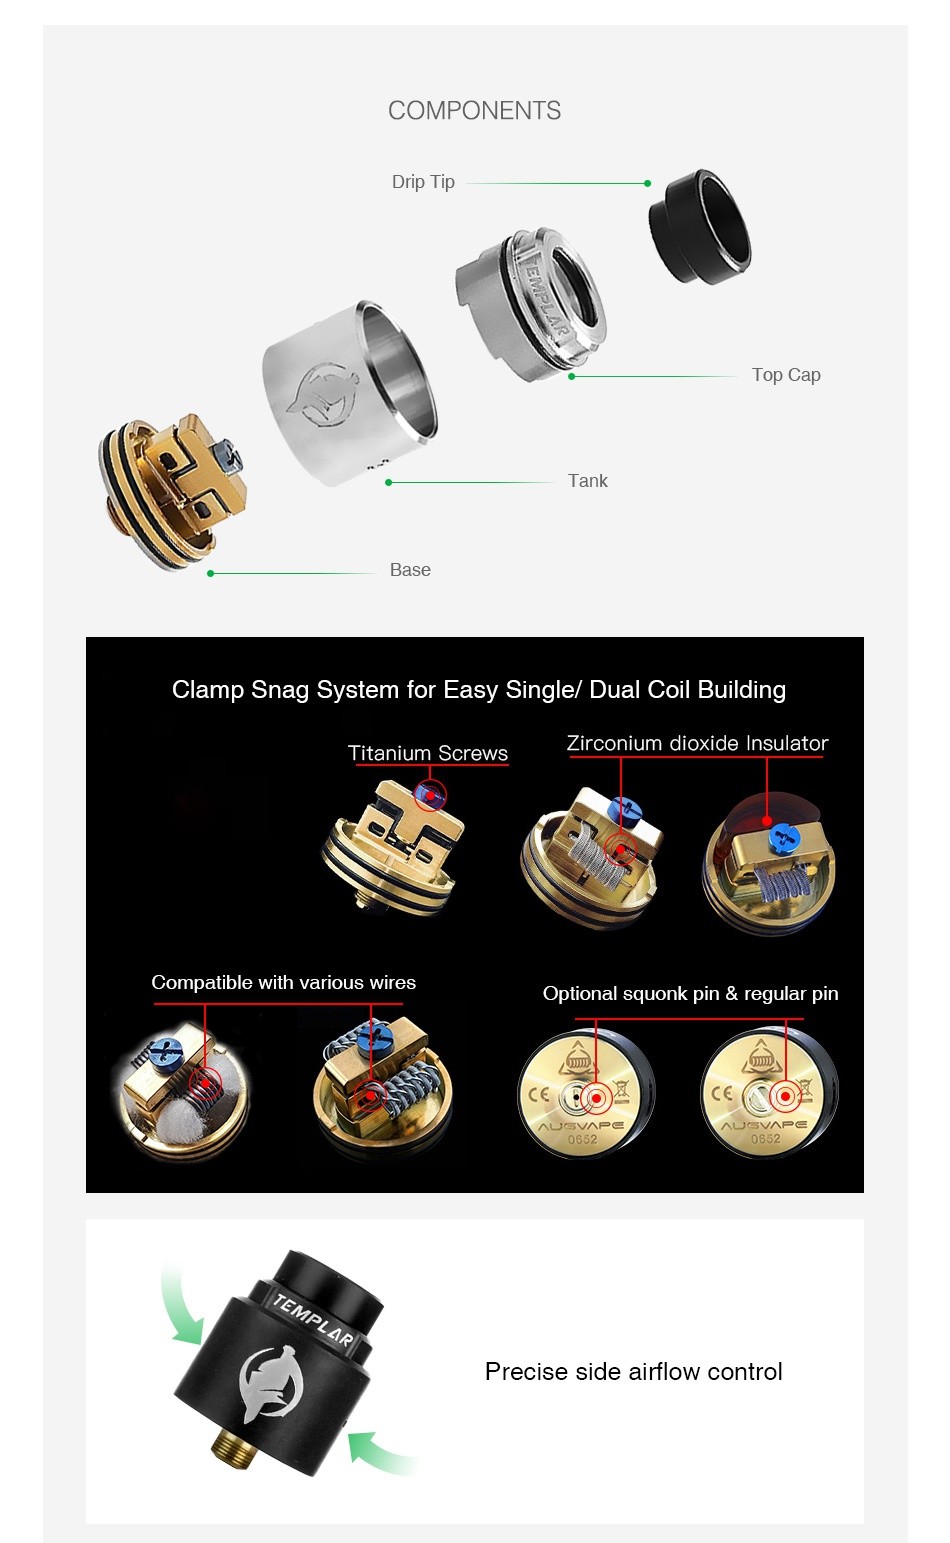 AUGVAPE Templar RDA COMPONENTS Drip T p cap Tank Base Clamp Snag System for Easy Single  Dual Coil Building Titanium Screws Zirconium dioxide Insulator   Compatible with various wires Optional squonk pin regular pin Precise side airflow control